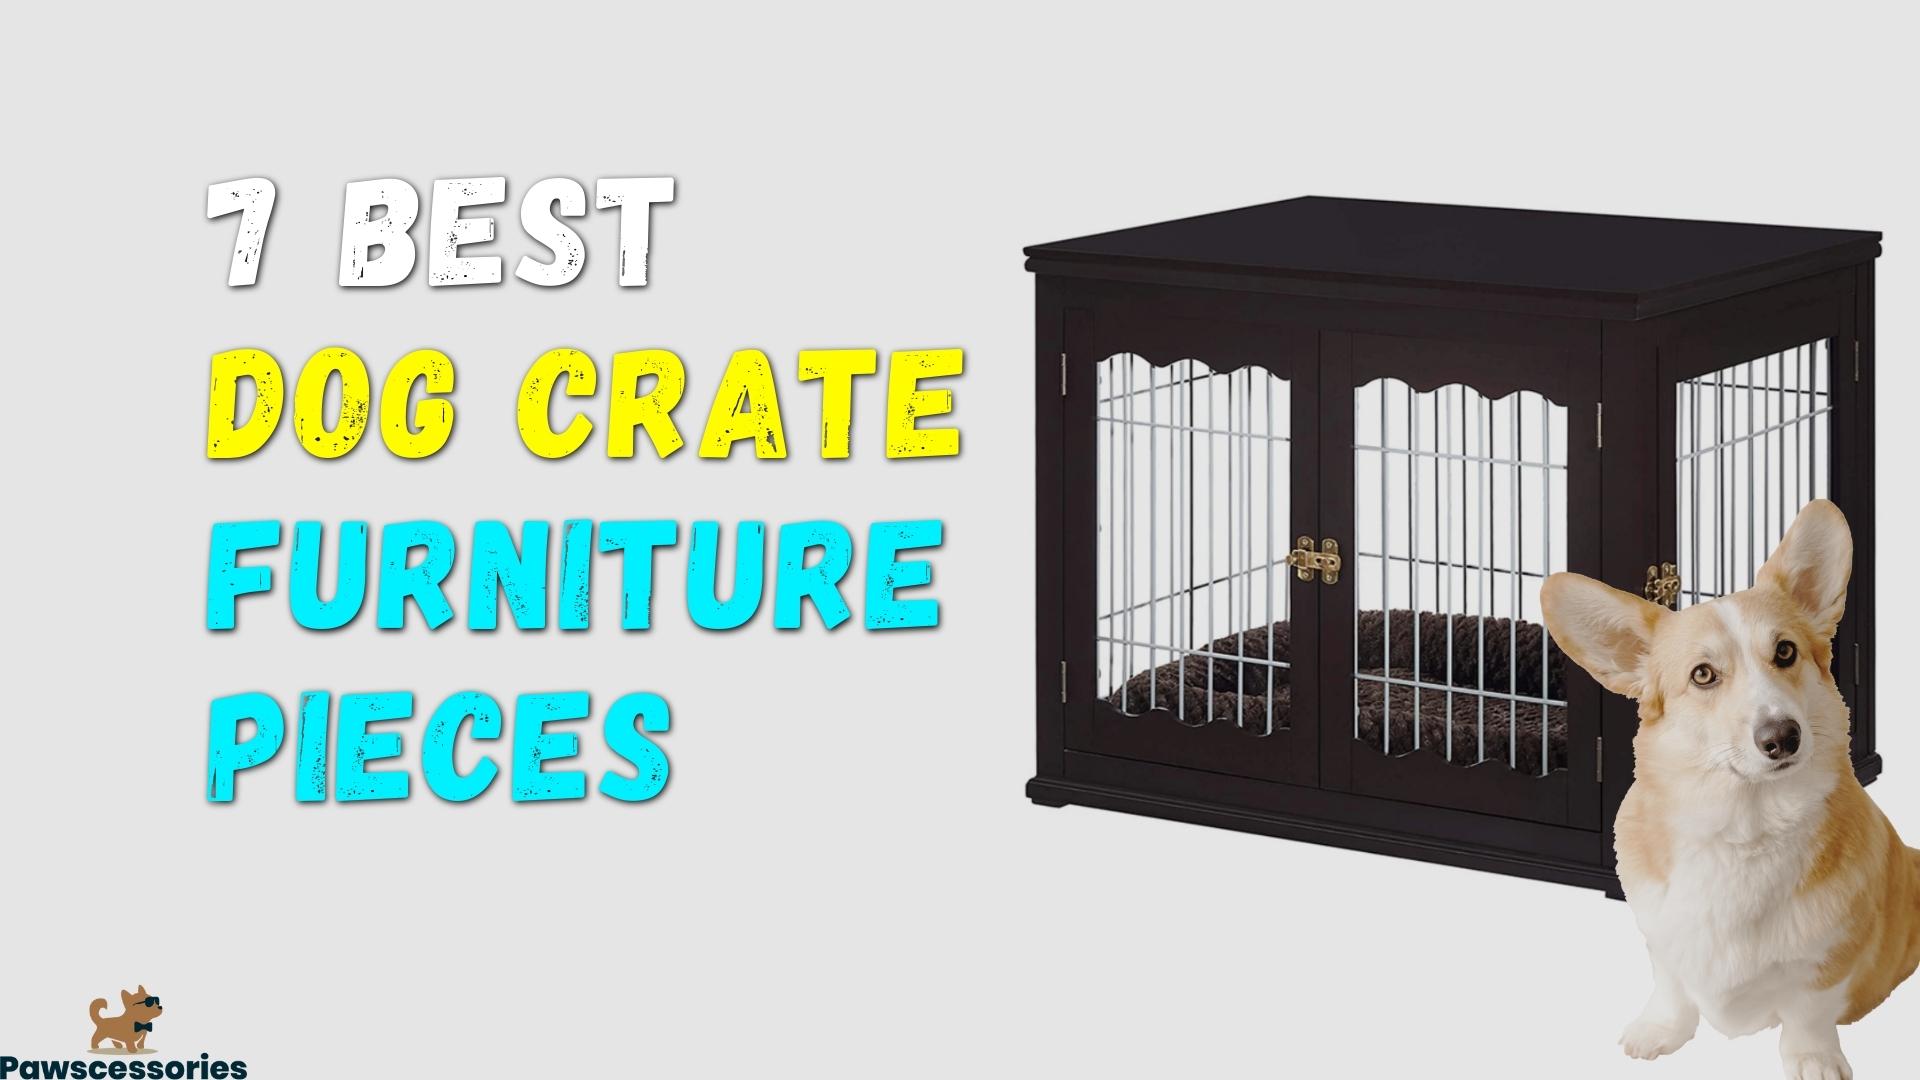 7 Best Dog Crate Furniture Pieces (End Tables & More)